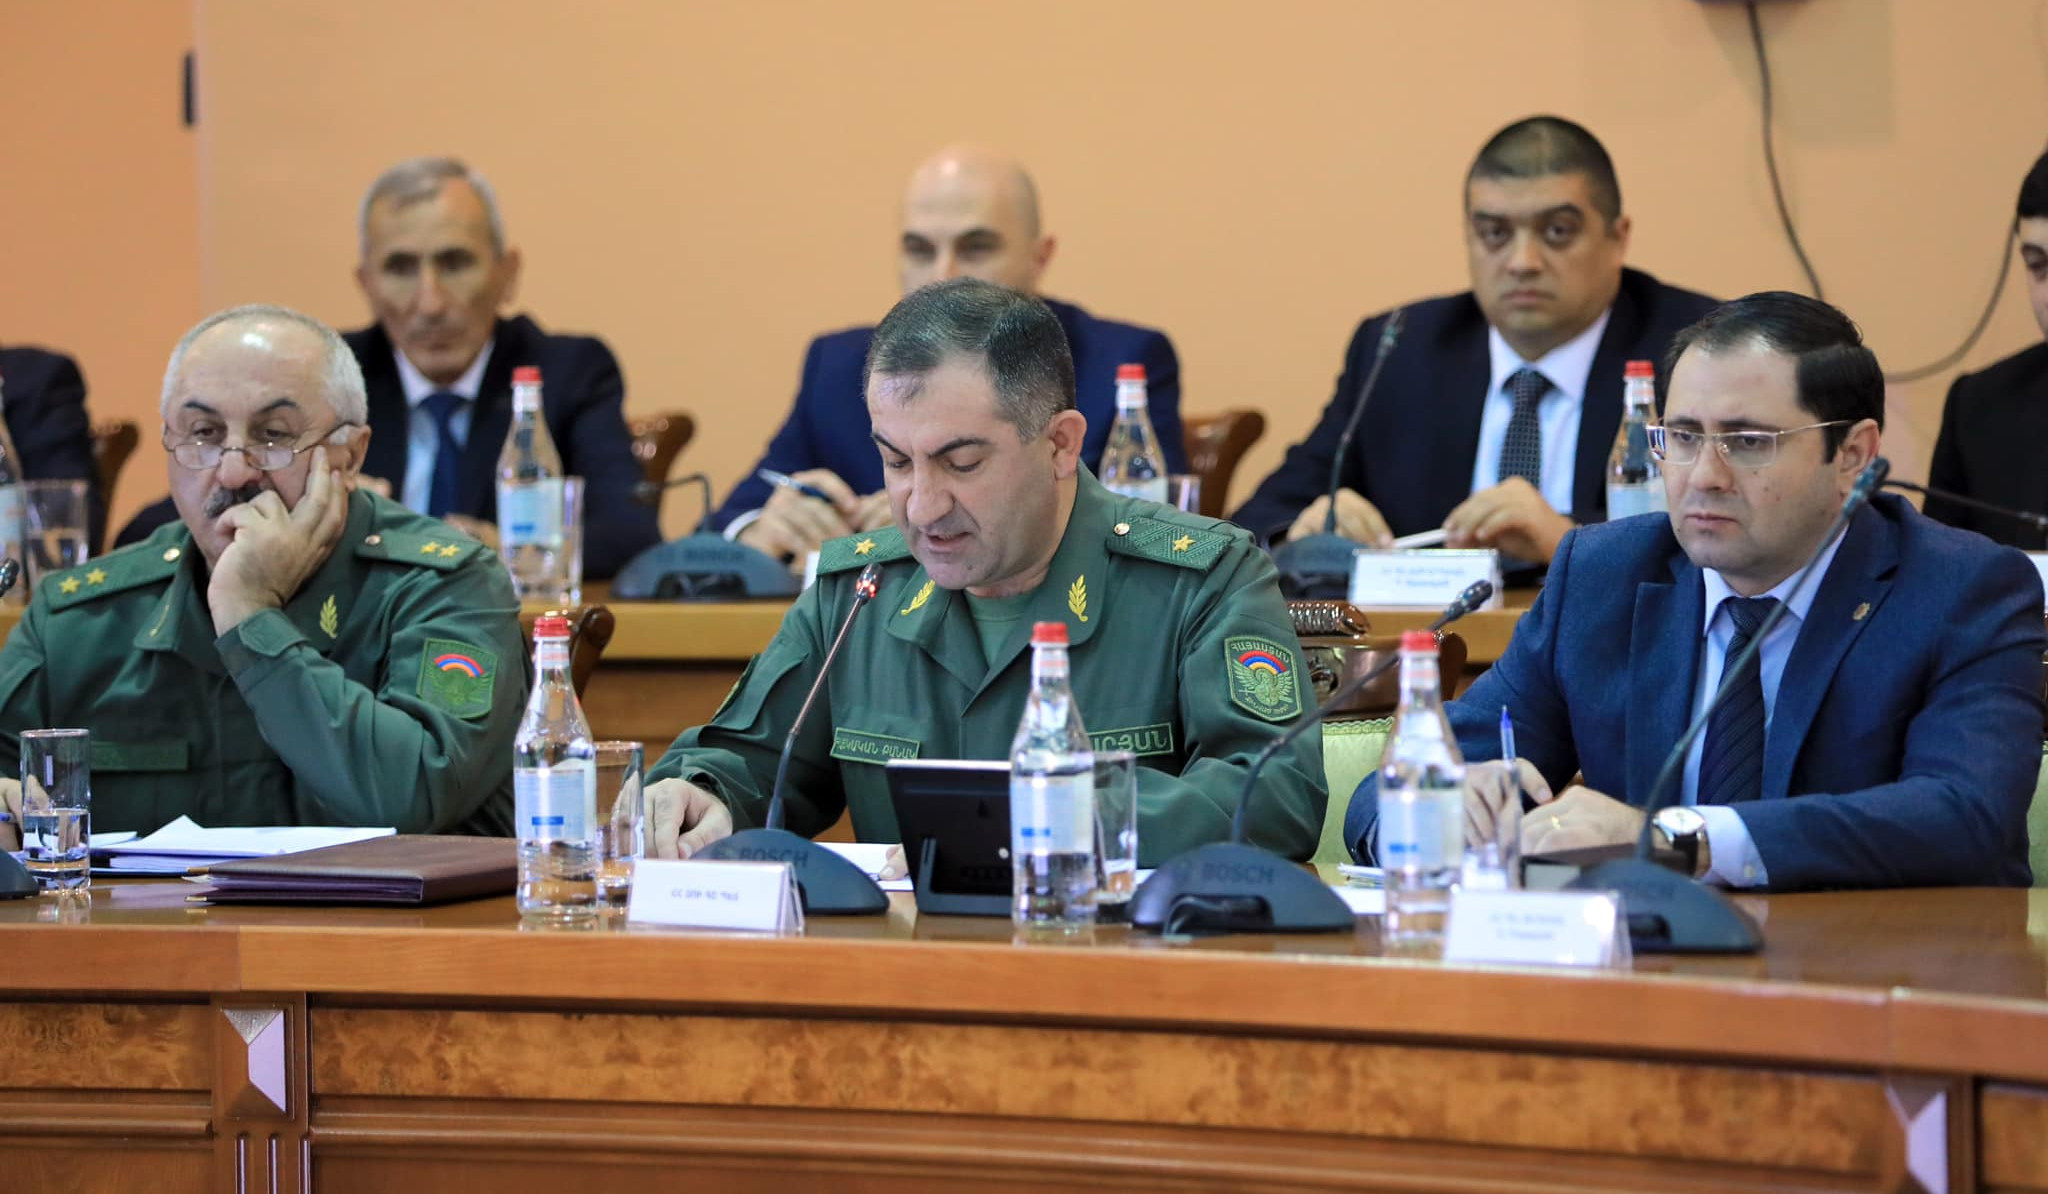 Consultation chaired by Armenia’s Minister of Defence was held